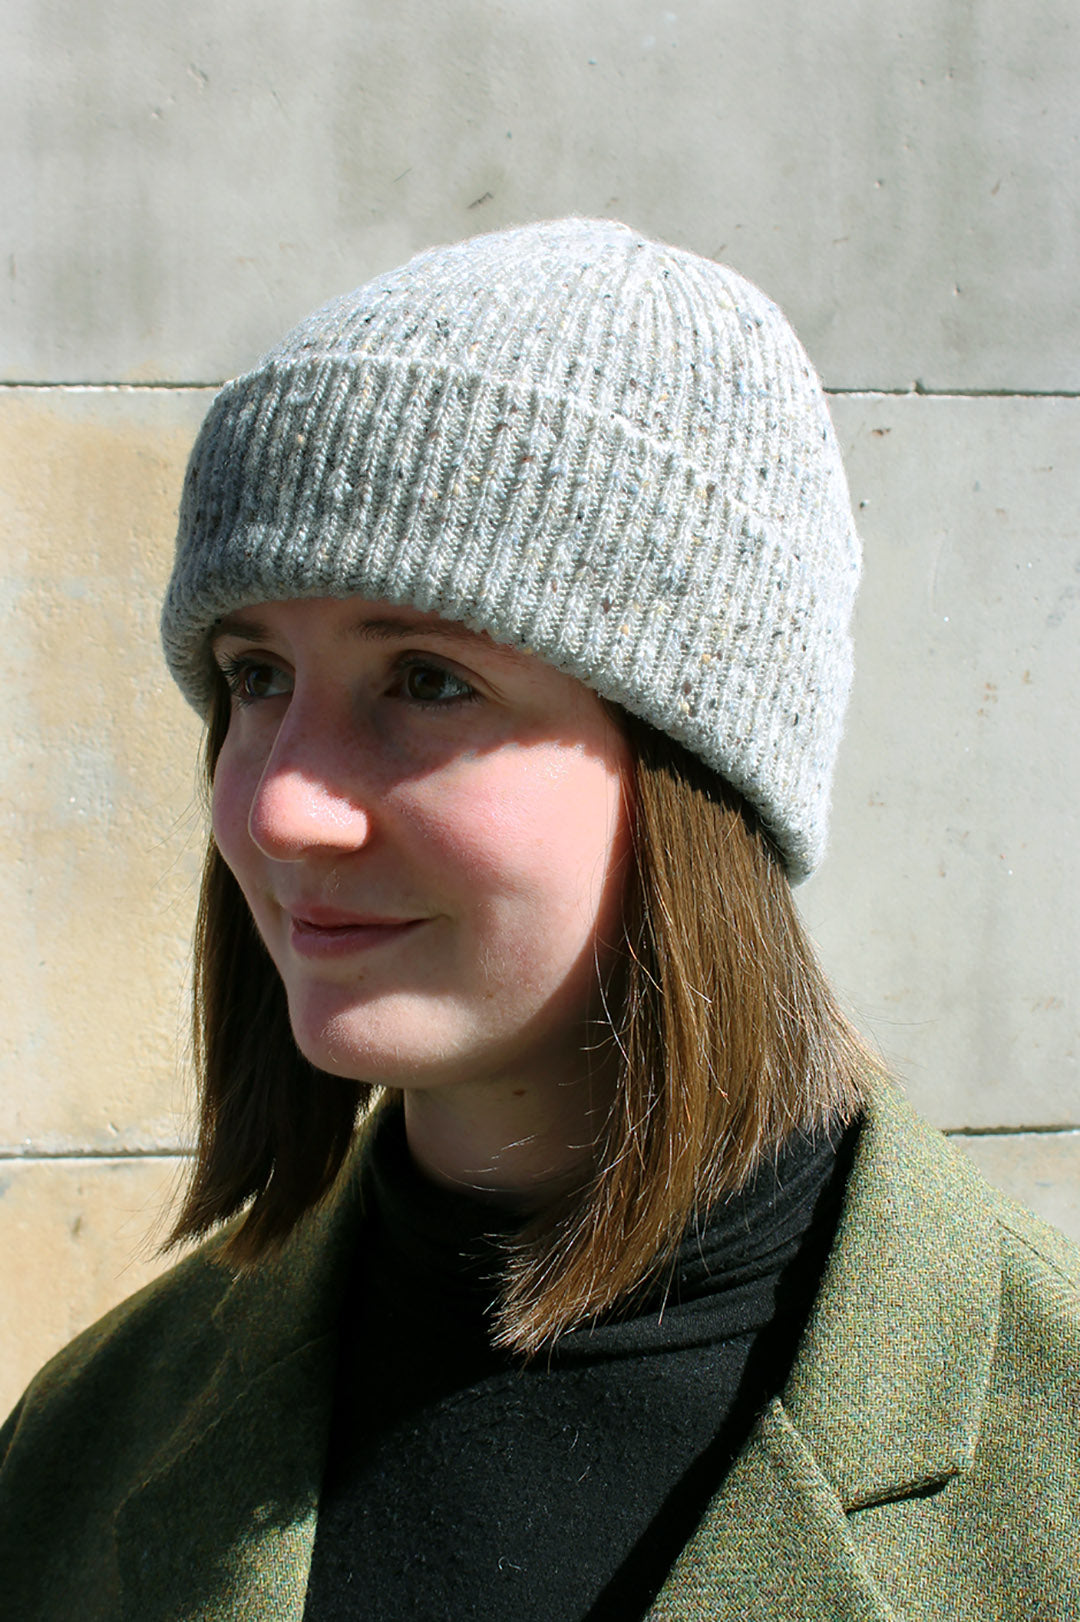 Knitted beanie hat in Donegal Yarn. Creamy grey yarn with flecks of brown, black and blue grey through it. Scottish Textiles Showcase.